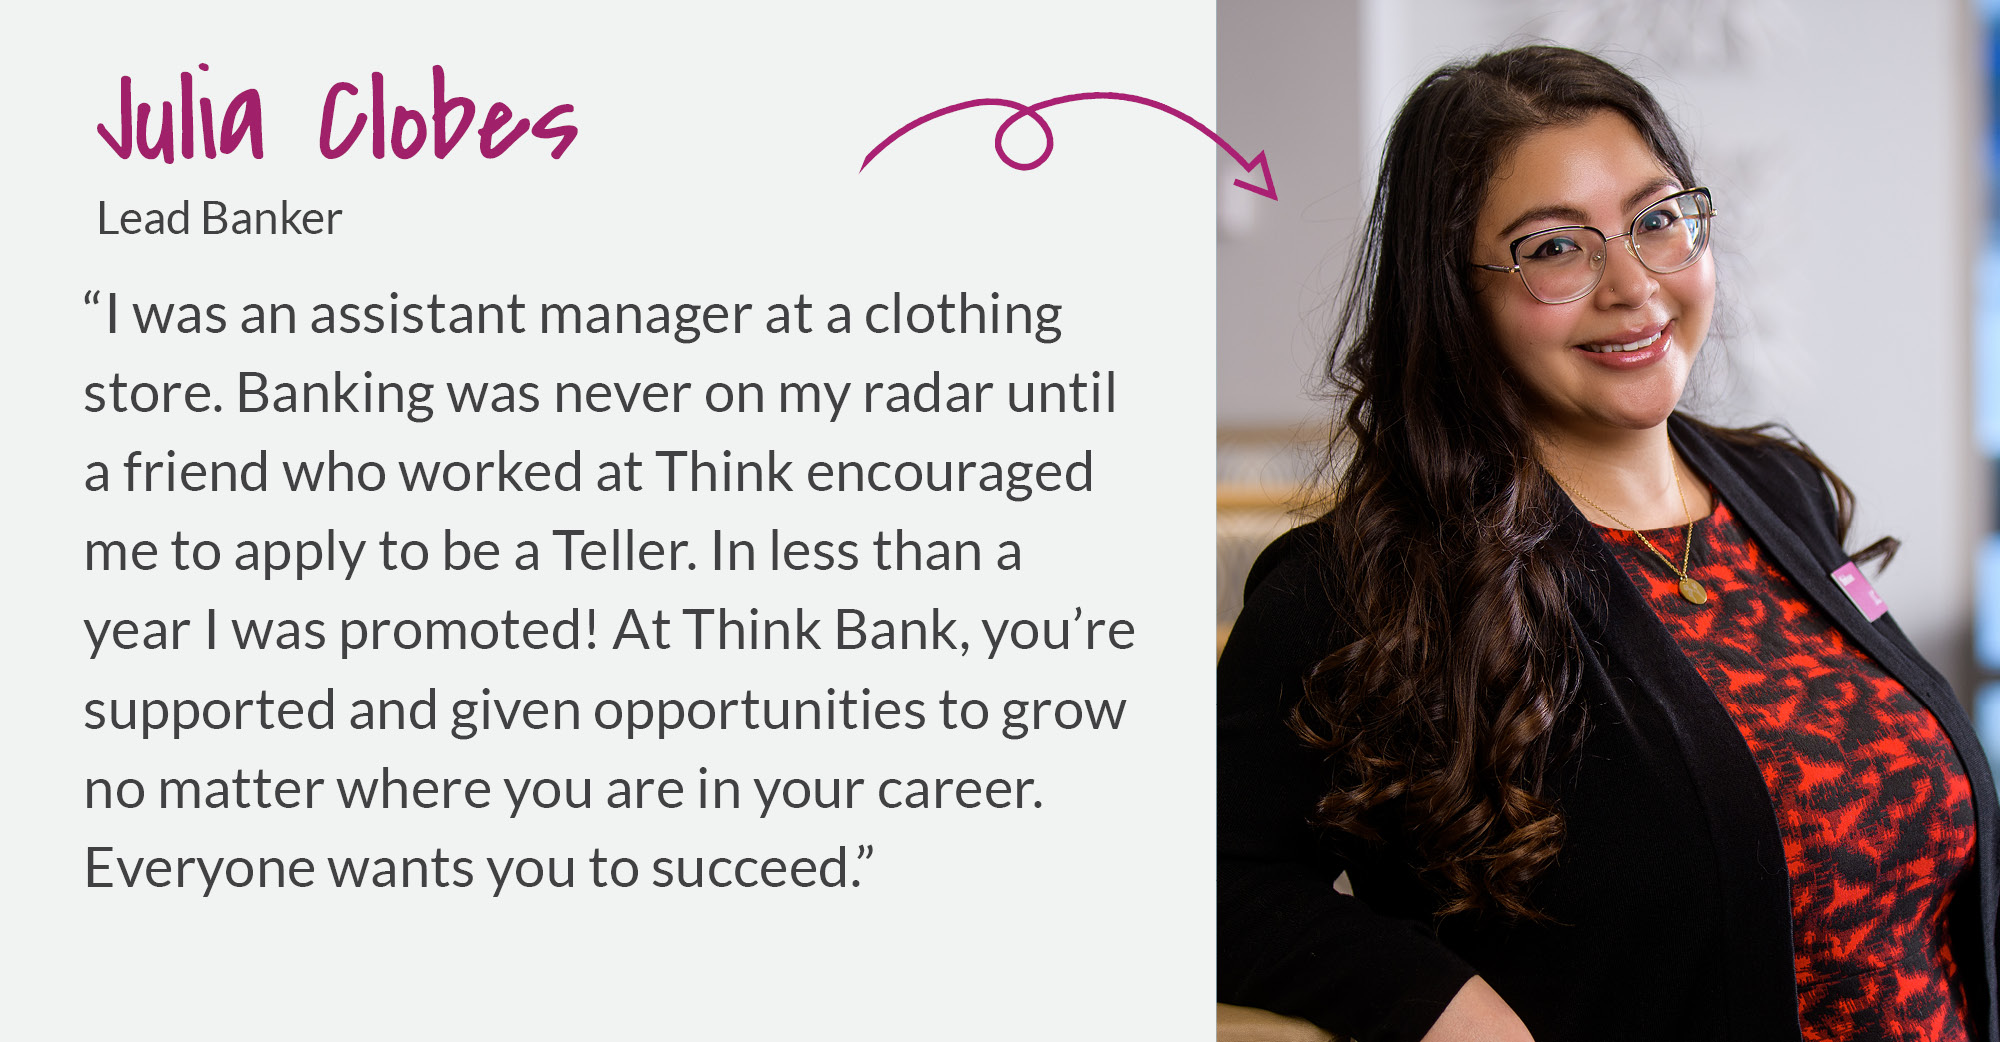 Julia Clobes - I was an assistant manager at a clothing store. Banking was never on my radar until a friend who worked at Think encouraged me to apply.